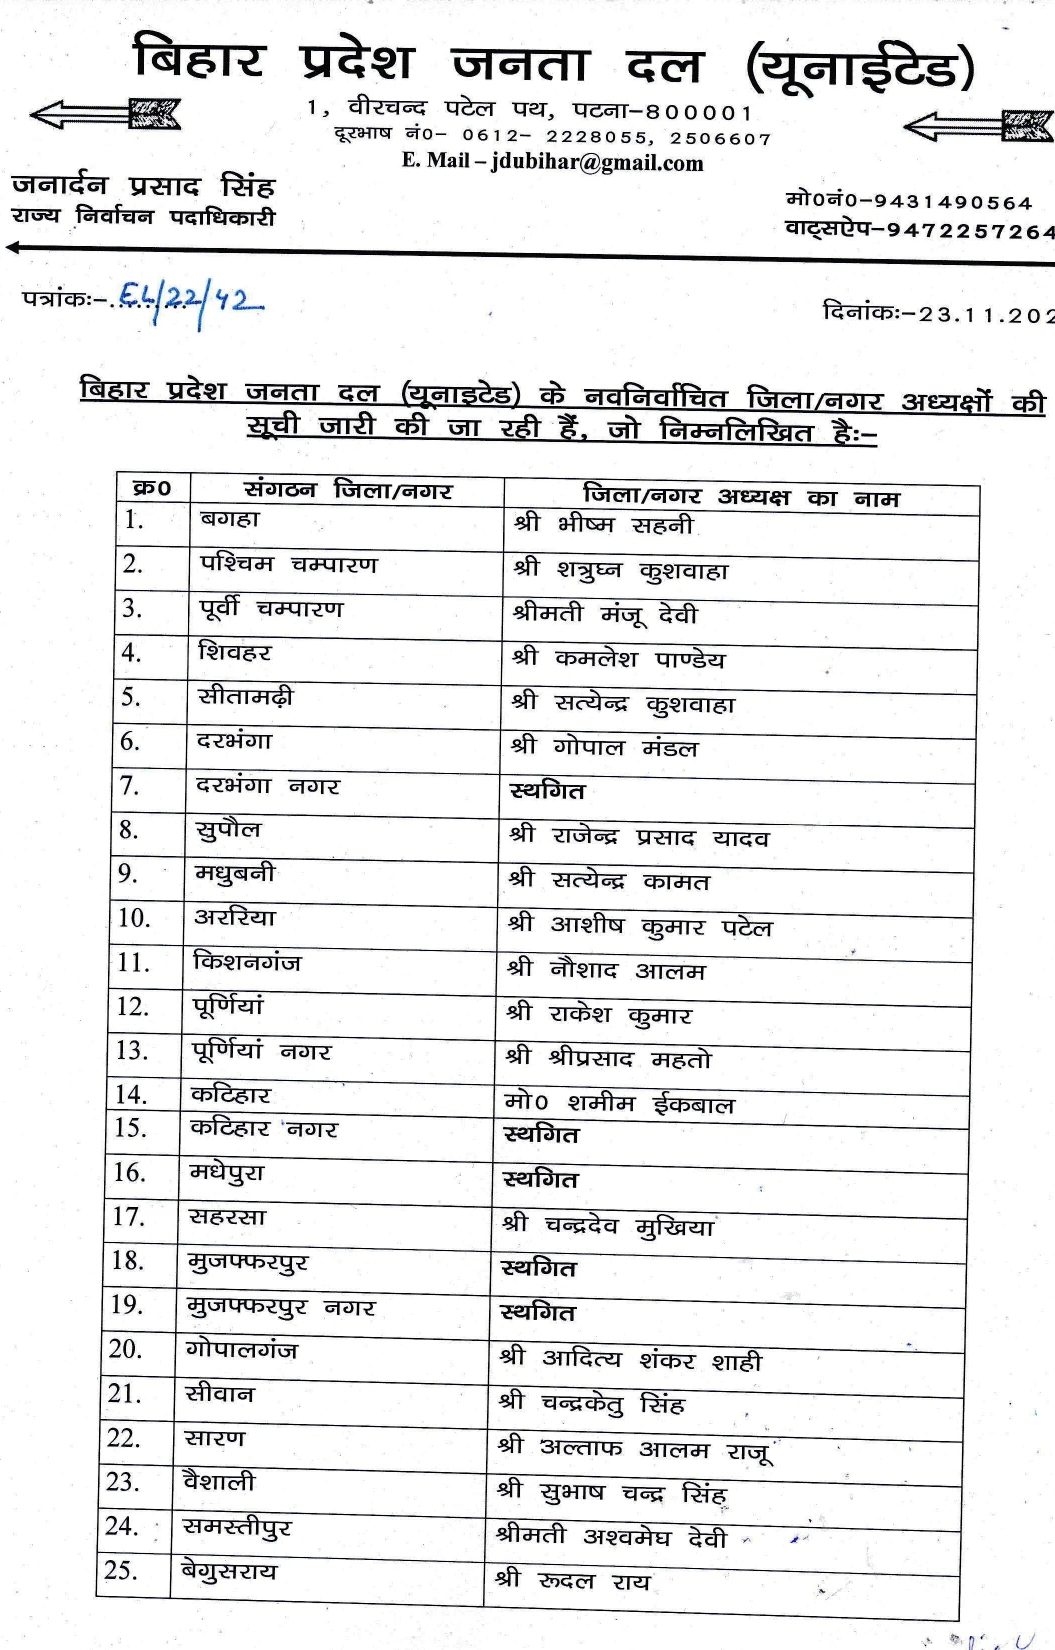 Election of state JDU president will be held on November 27 list of newly elected district presidents released see list 2